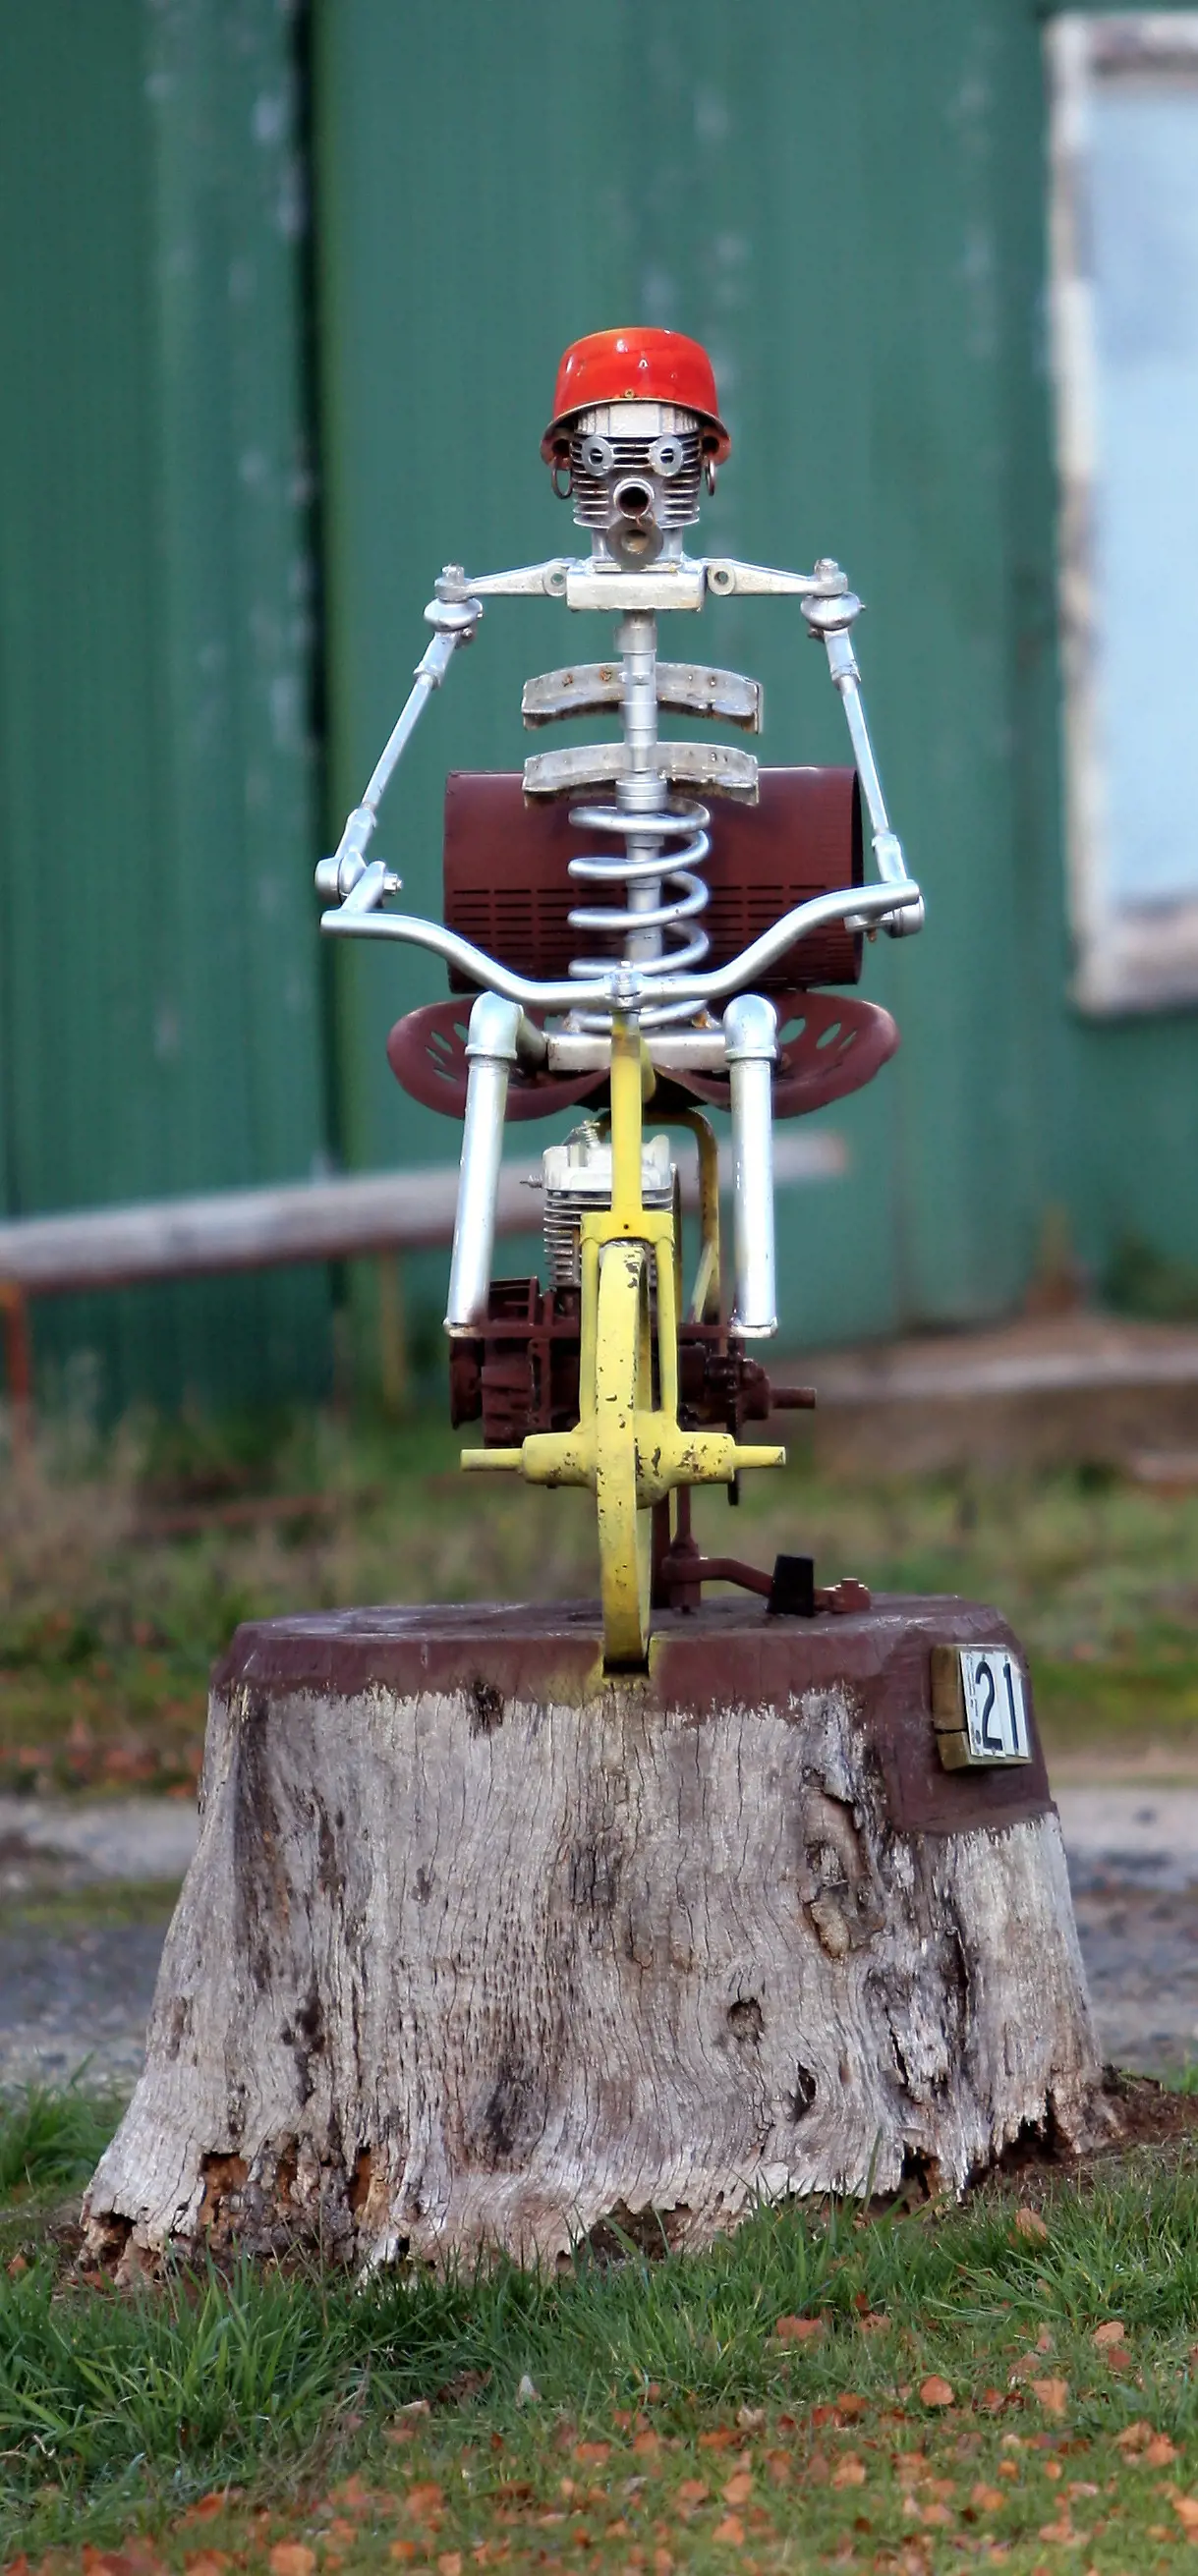 Wilmot novelty letterbox trail - Metalwork of a person on a bike.